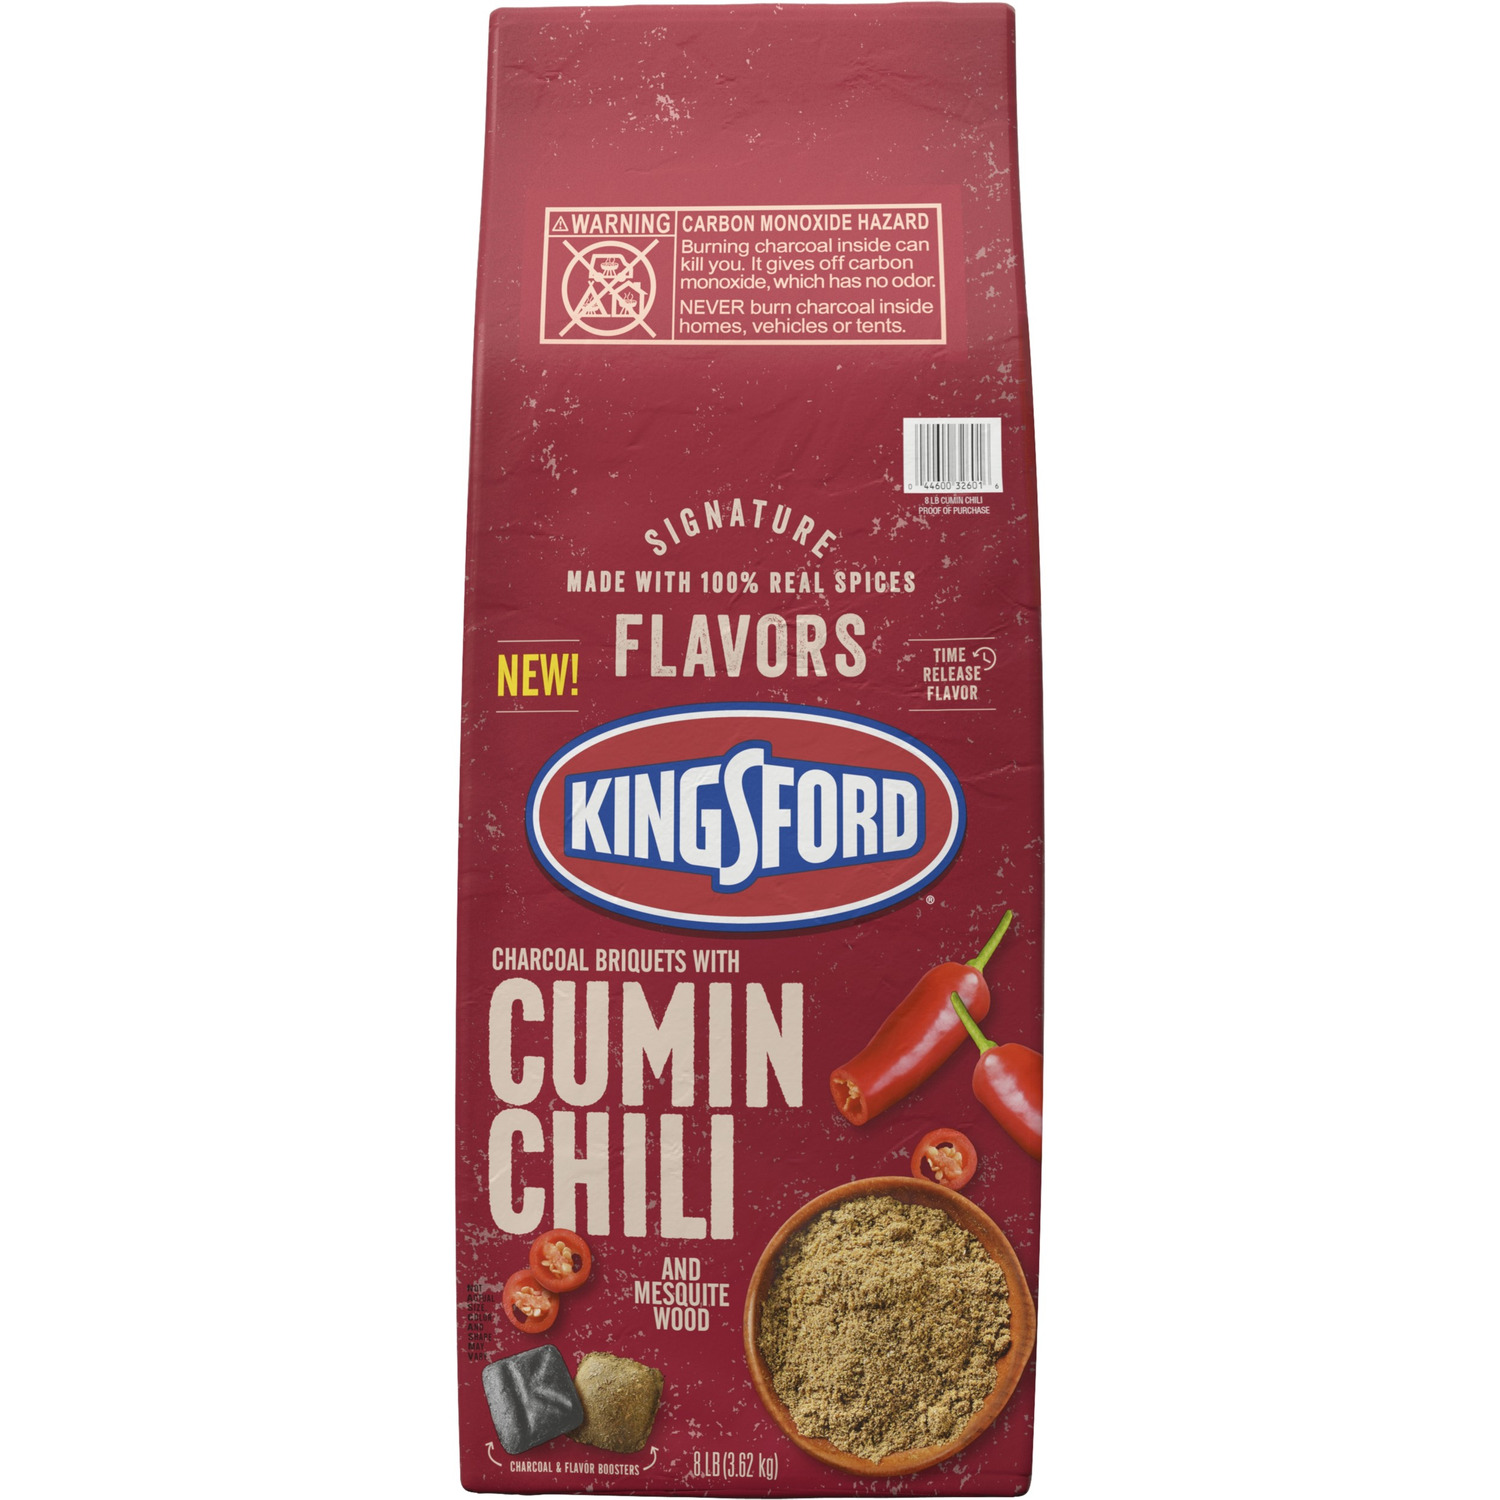 Kingsford Charcoal Briquettes with Cumin and Chili, Mesquite Wood, 8 Pounds